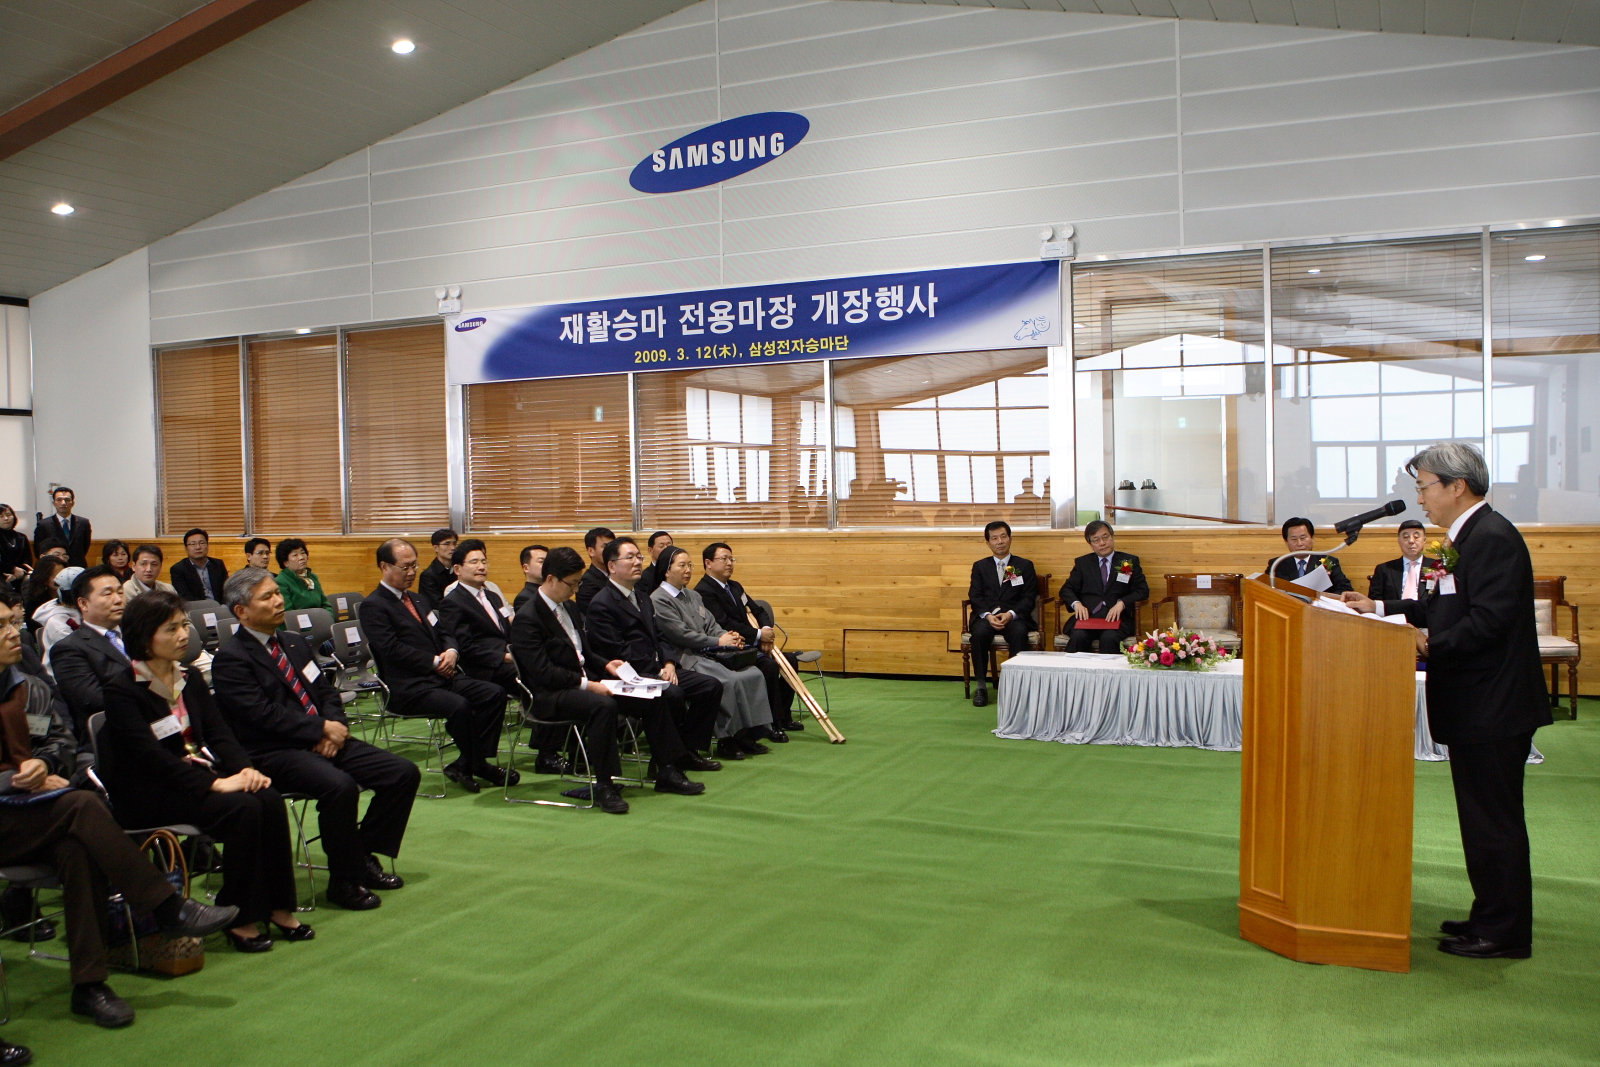 Opening ceremony of Samsung RD Center, the first RD center in Korea